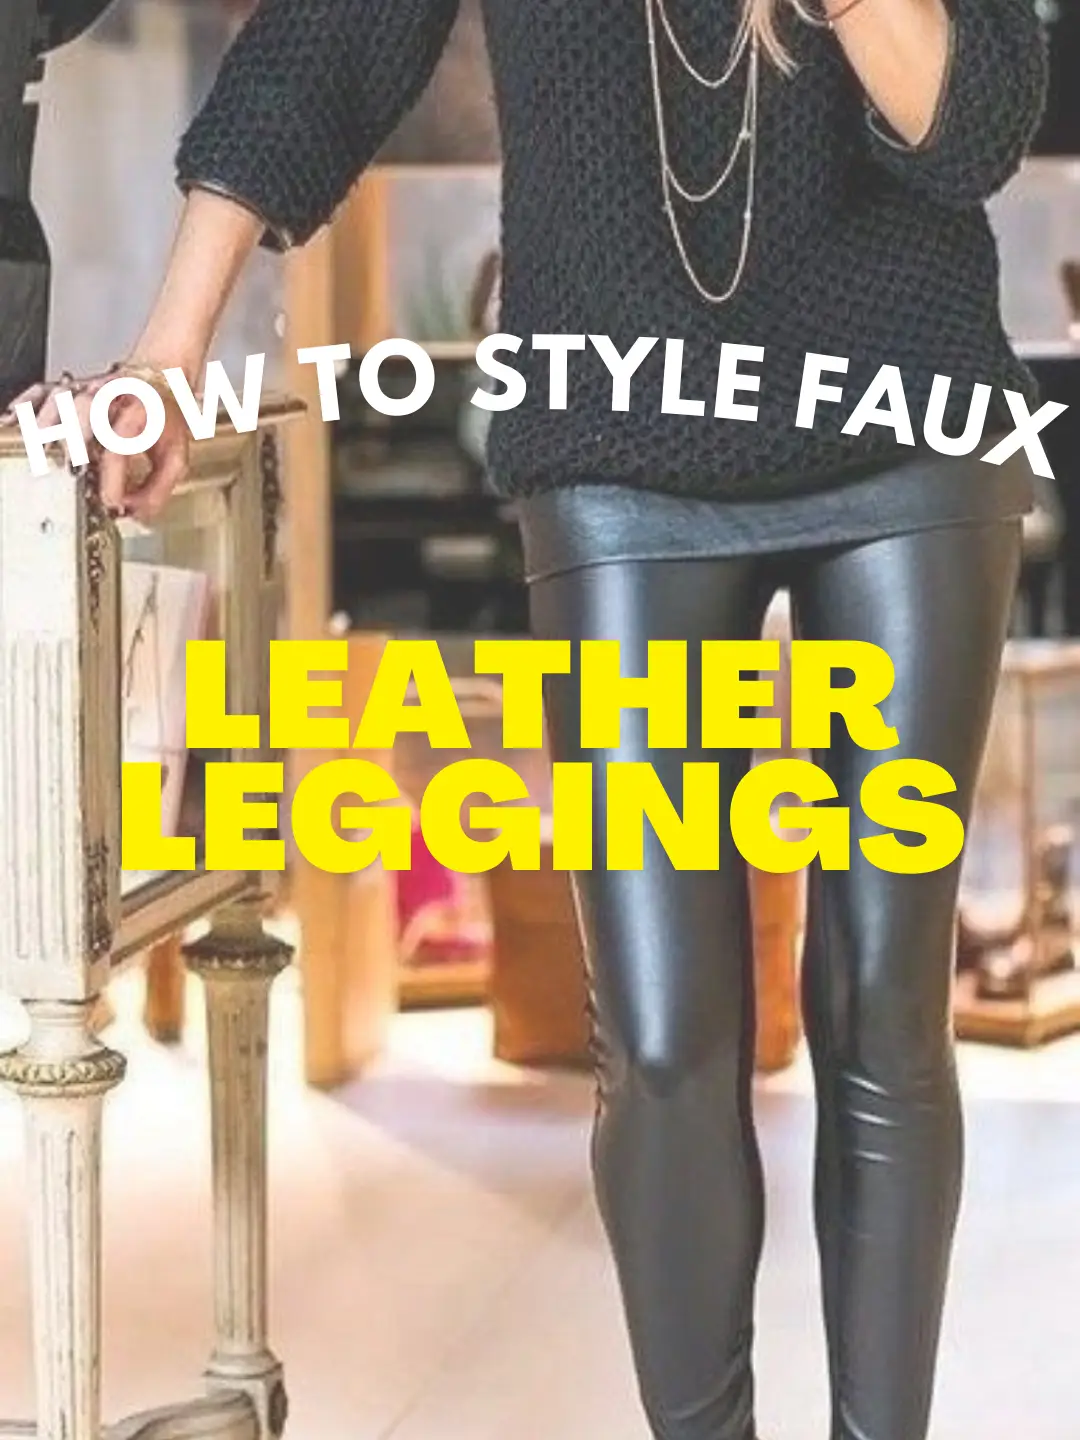 Spanx Faux Leather Leggings – Specialty Design Company